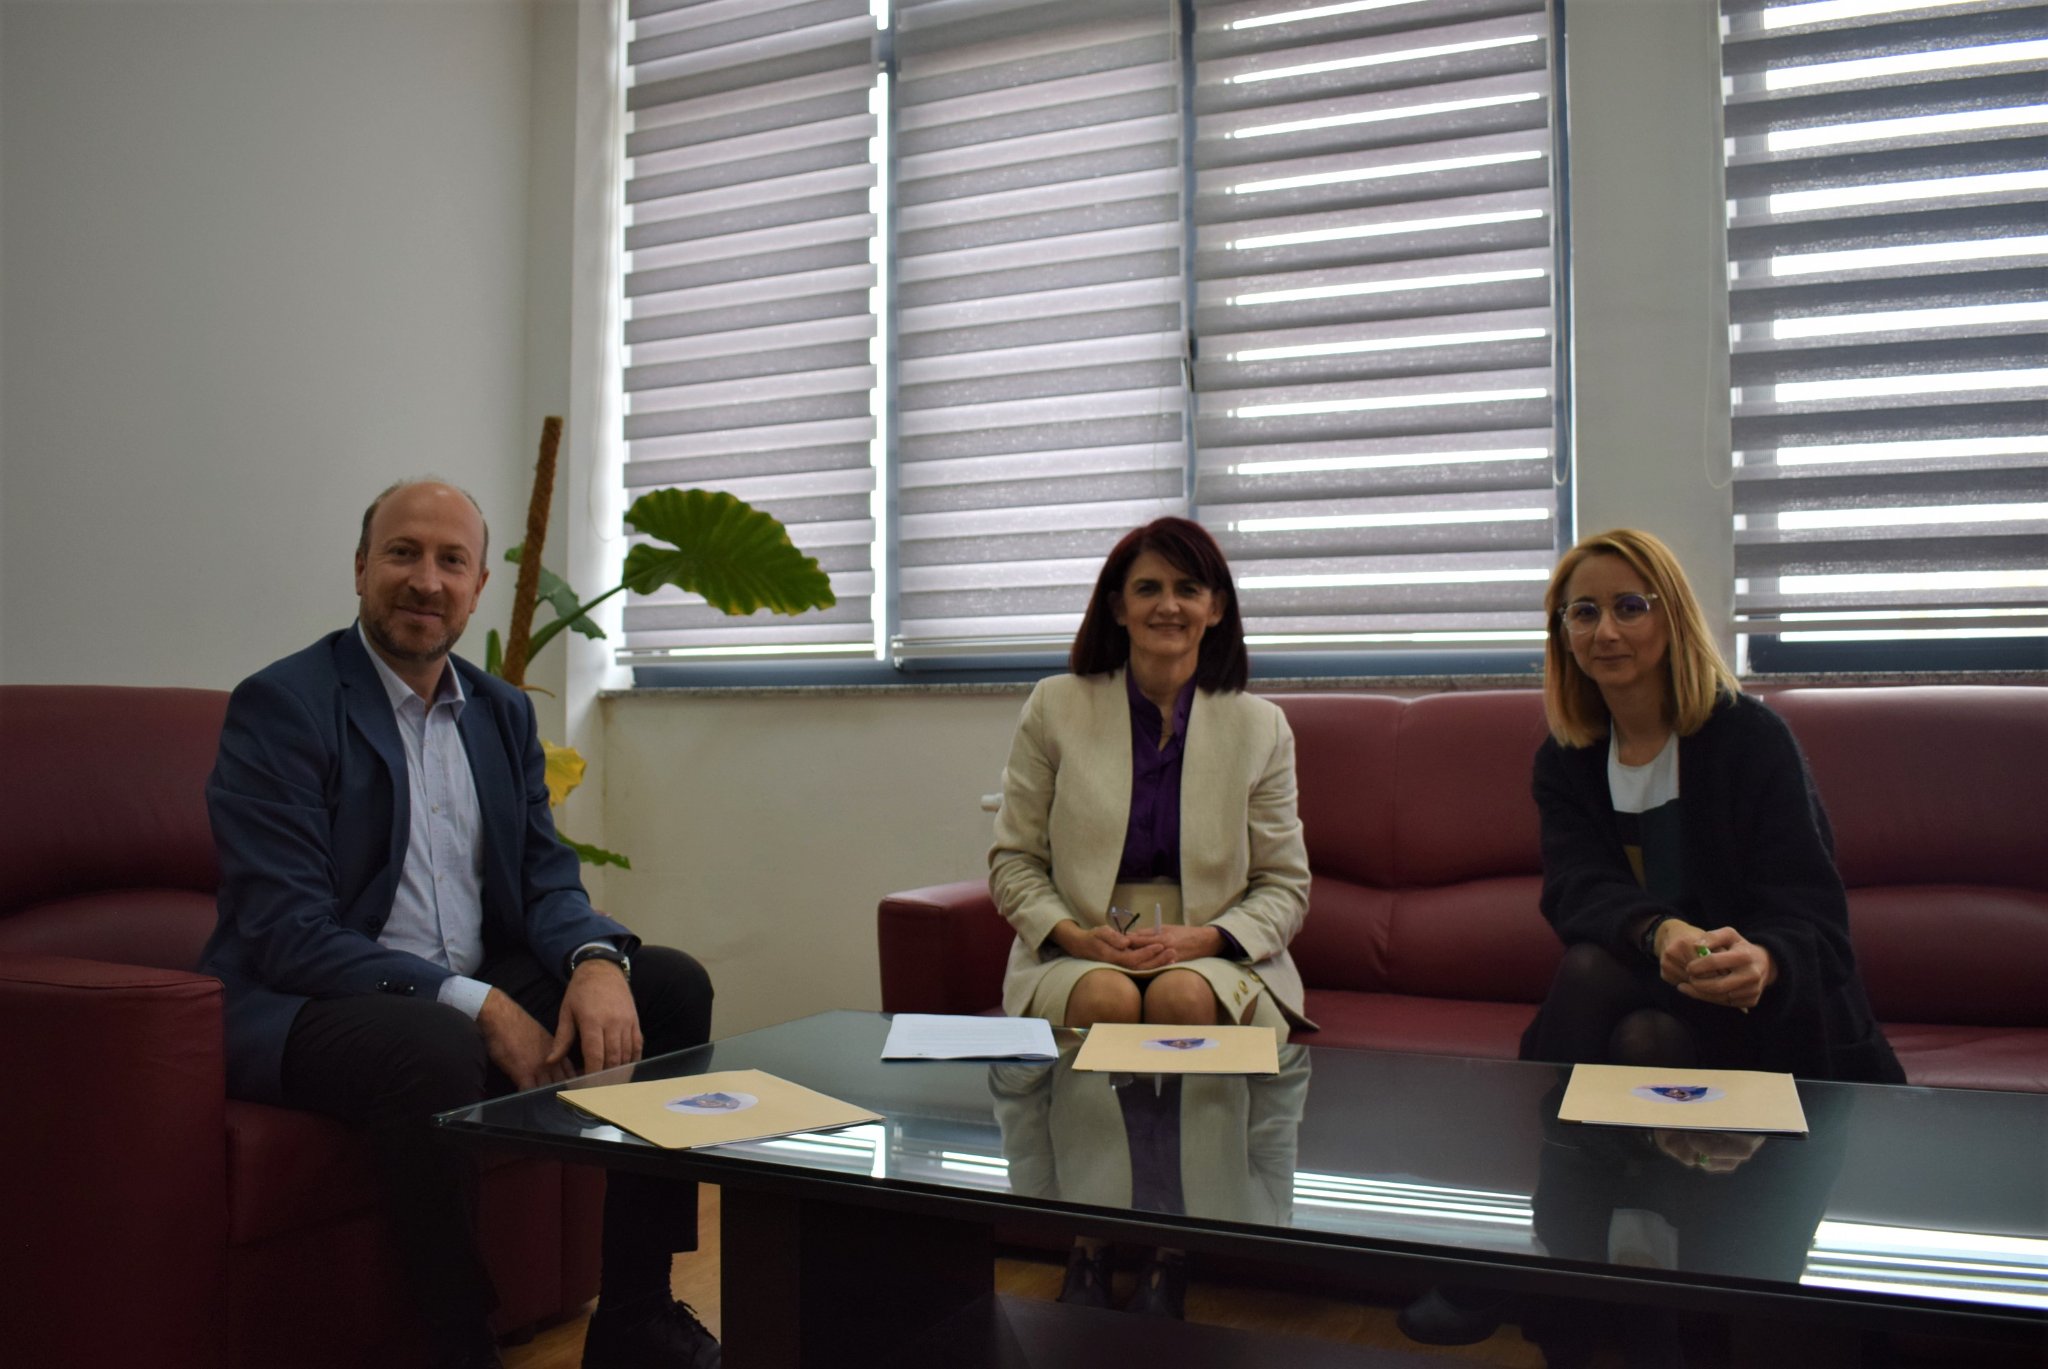 Today, Kosova – Women 4 Women and the Department of Psychology in the University of Prishtina came together to sign a Memorandum of Cooperation